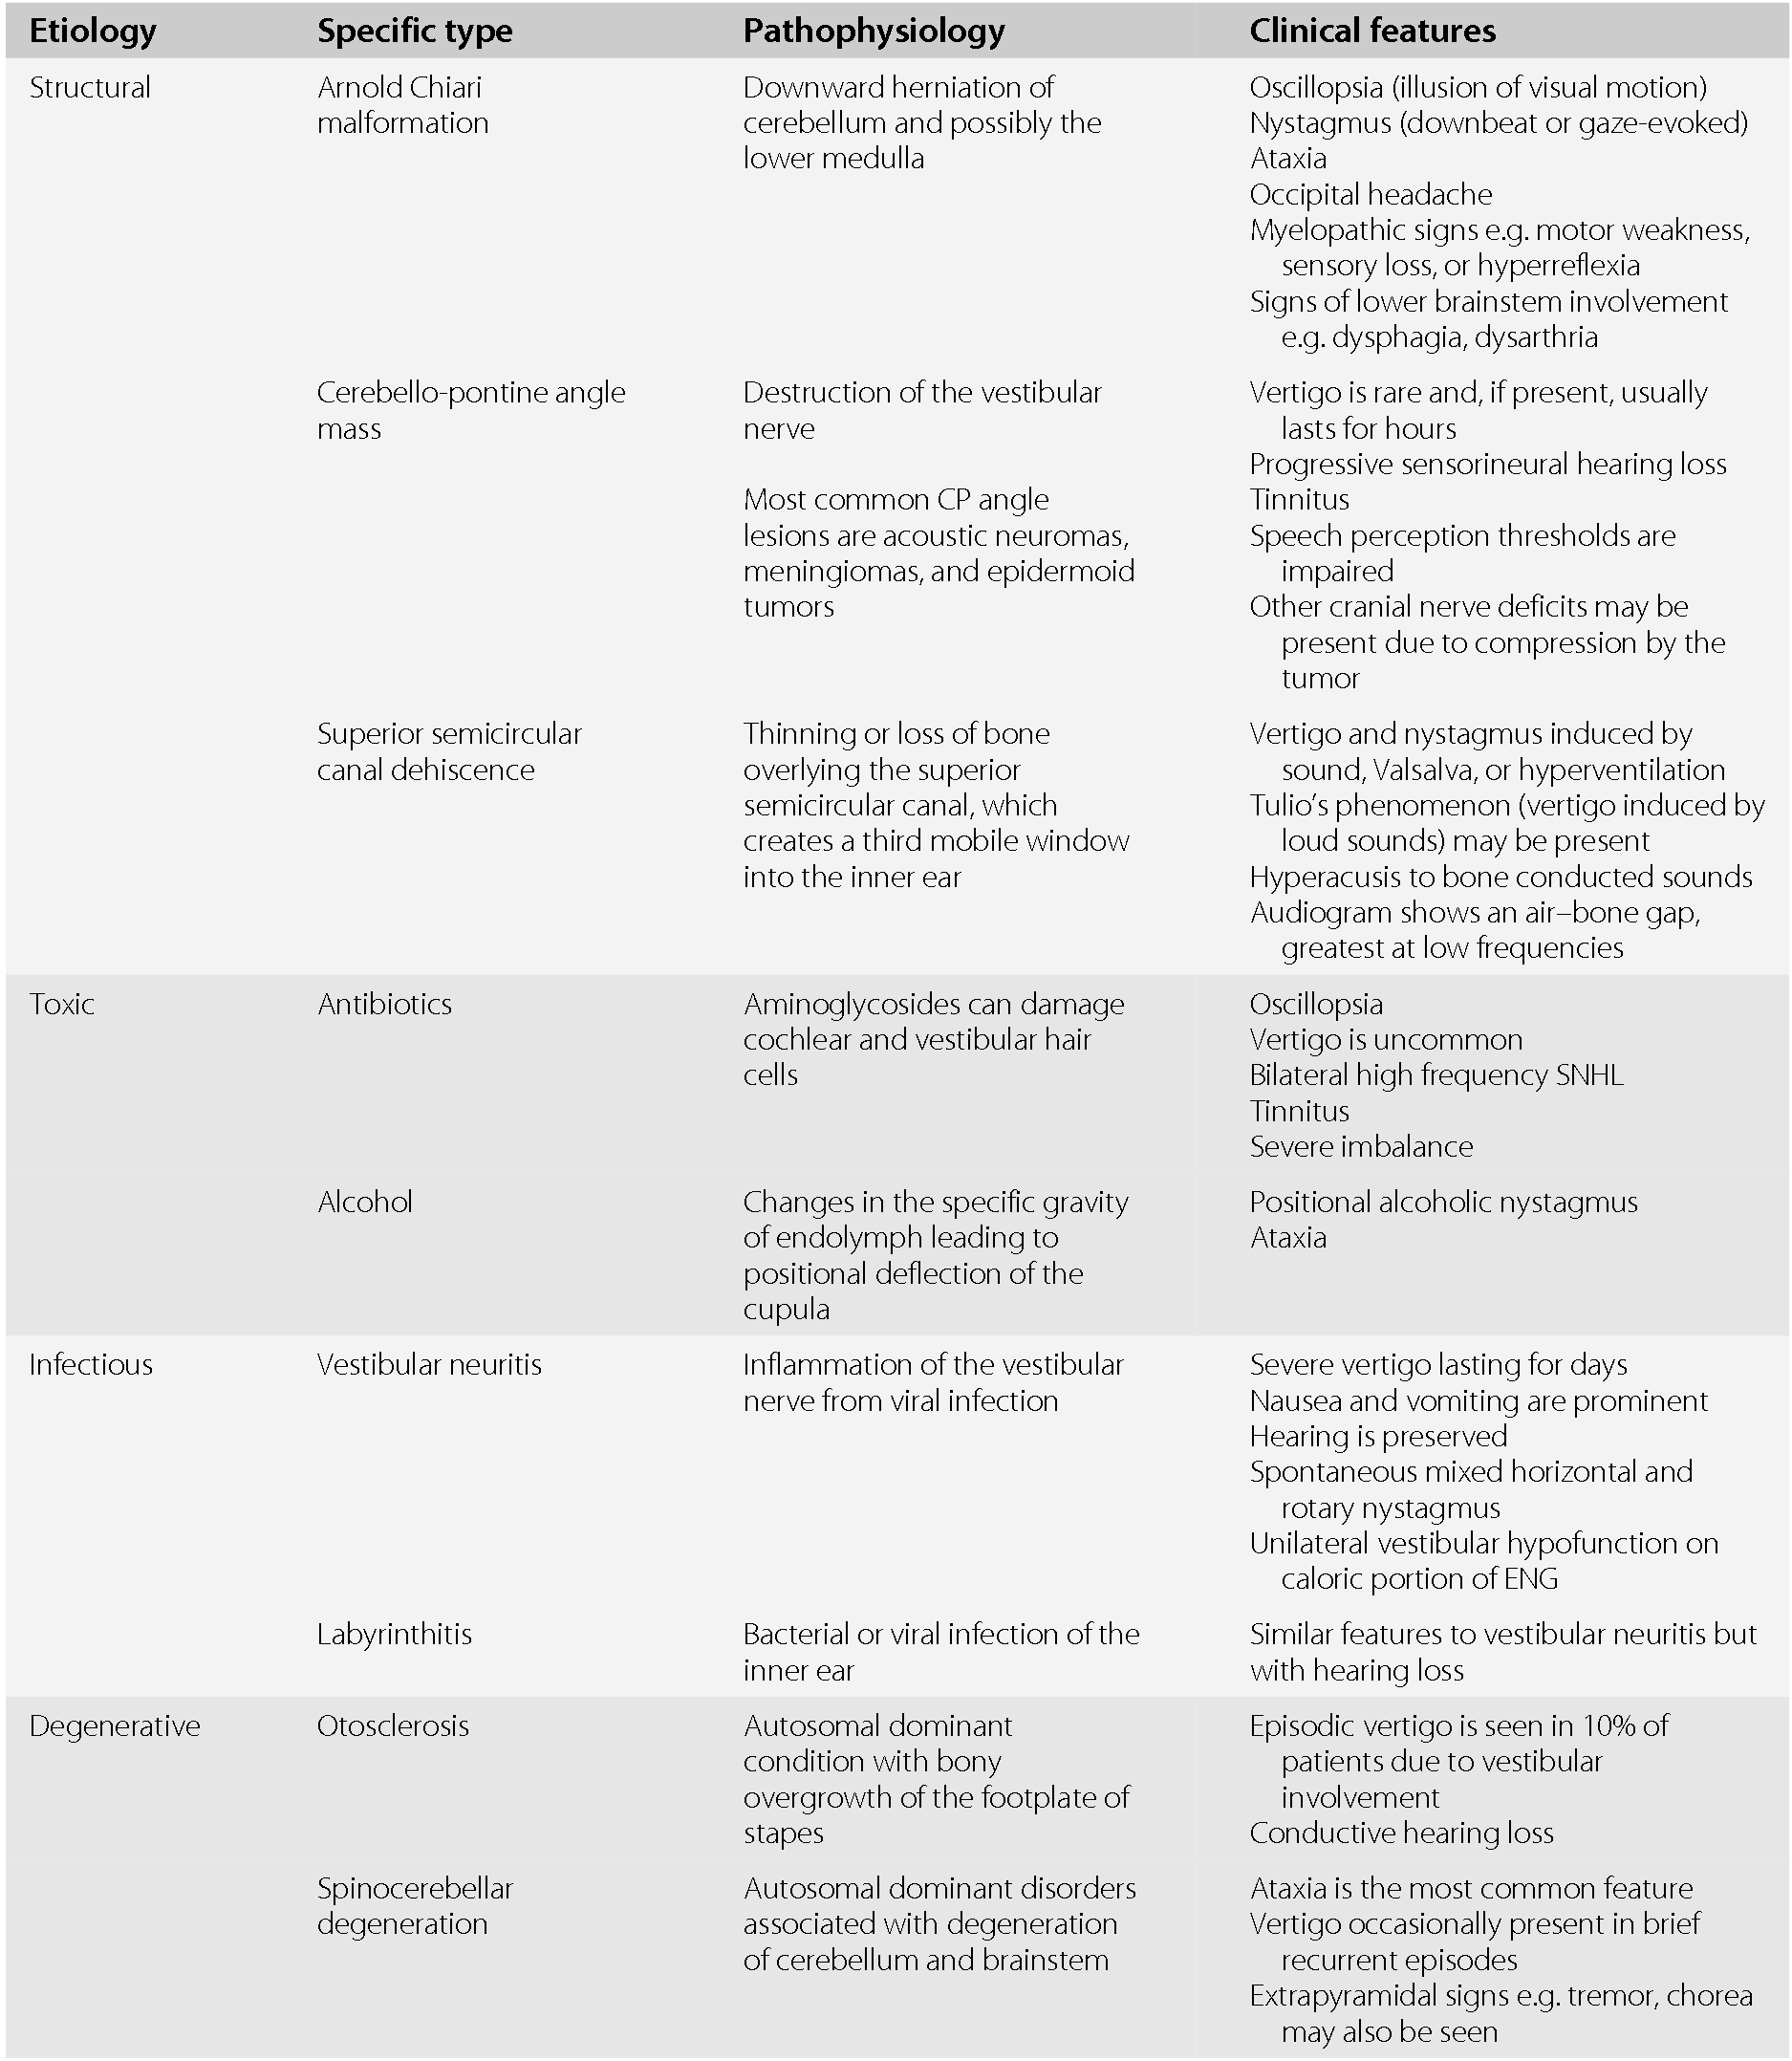 Differential Diagnosis of Abnormal Symptoms and Signs (Section 21